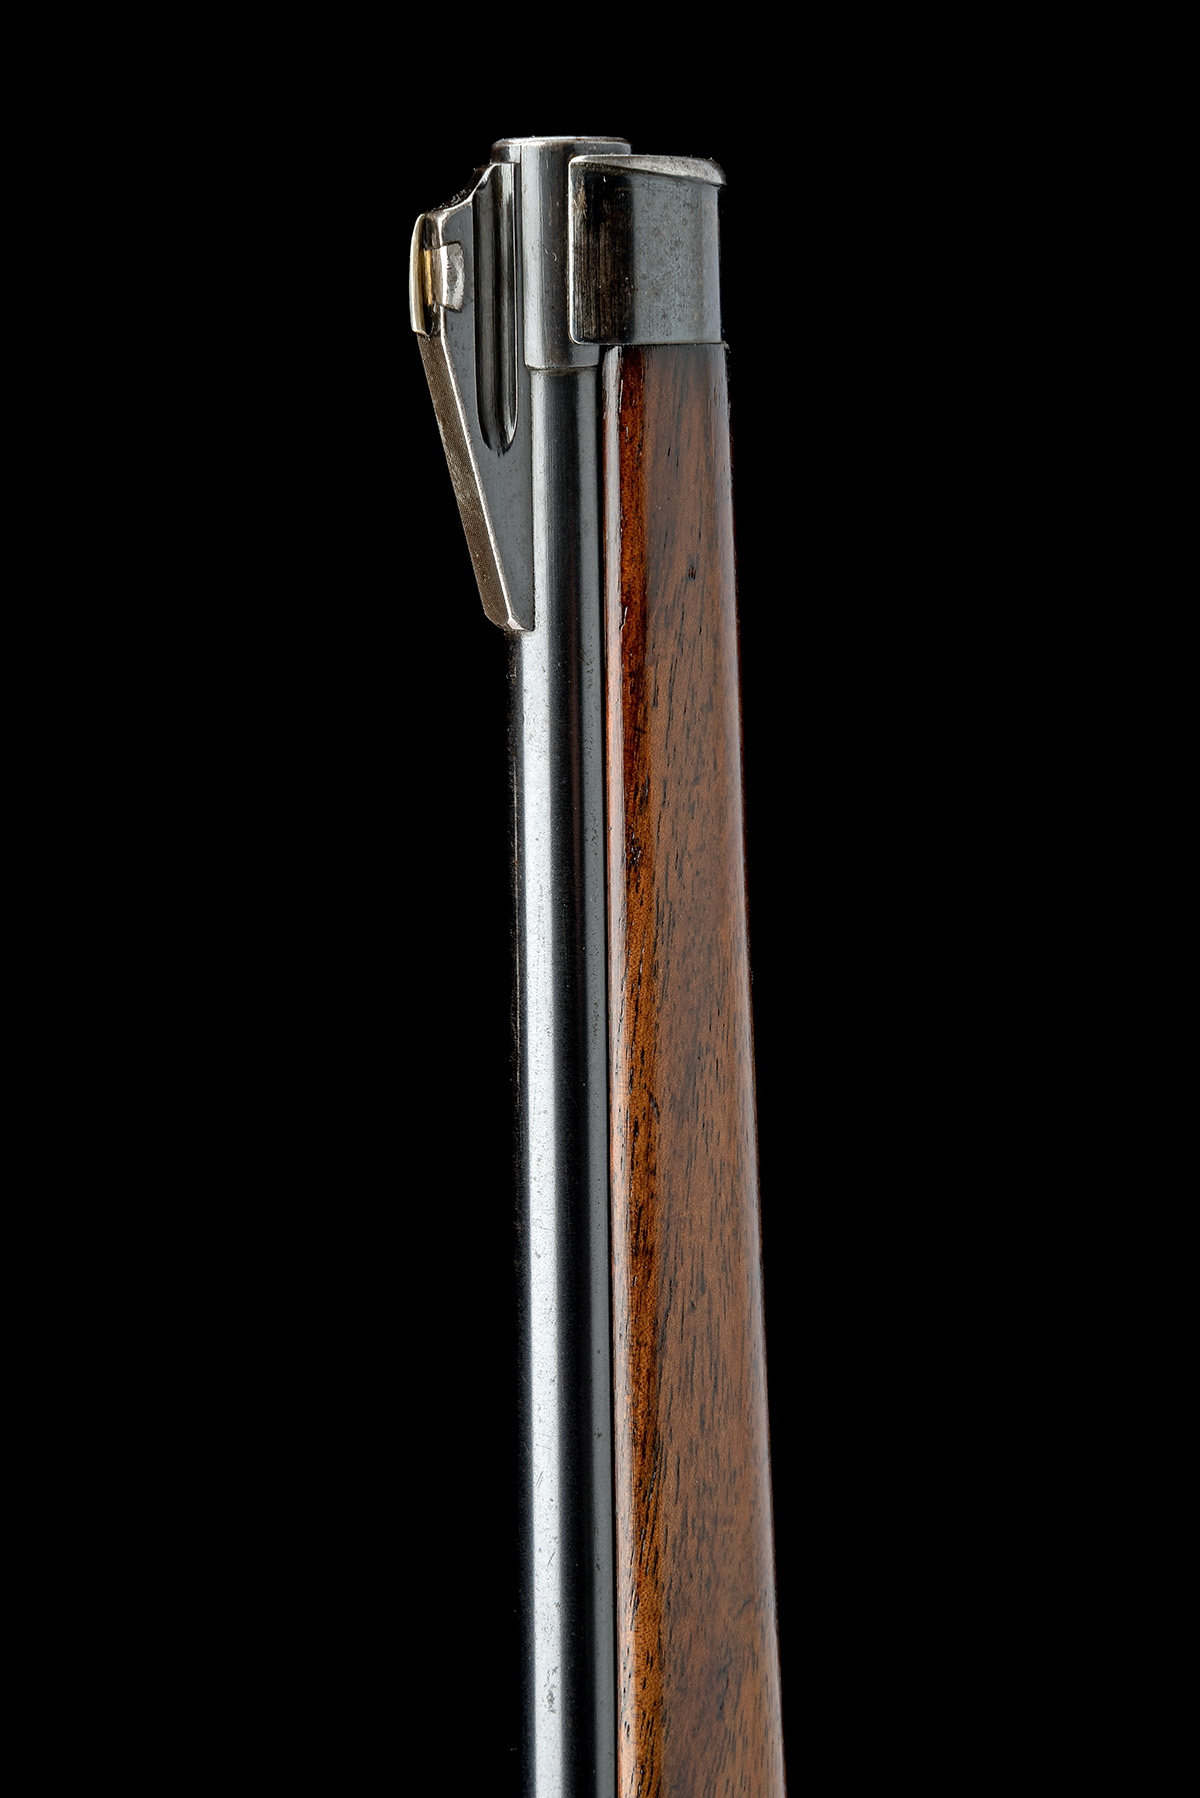 AN 8X56 M/S 'MODEL 1908' BOLT-MAGAZINE STUTZEN SPORTING RIFLE BY STEYR, serial no. 11884, for - Image 9 of 10